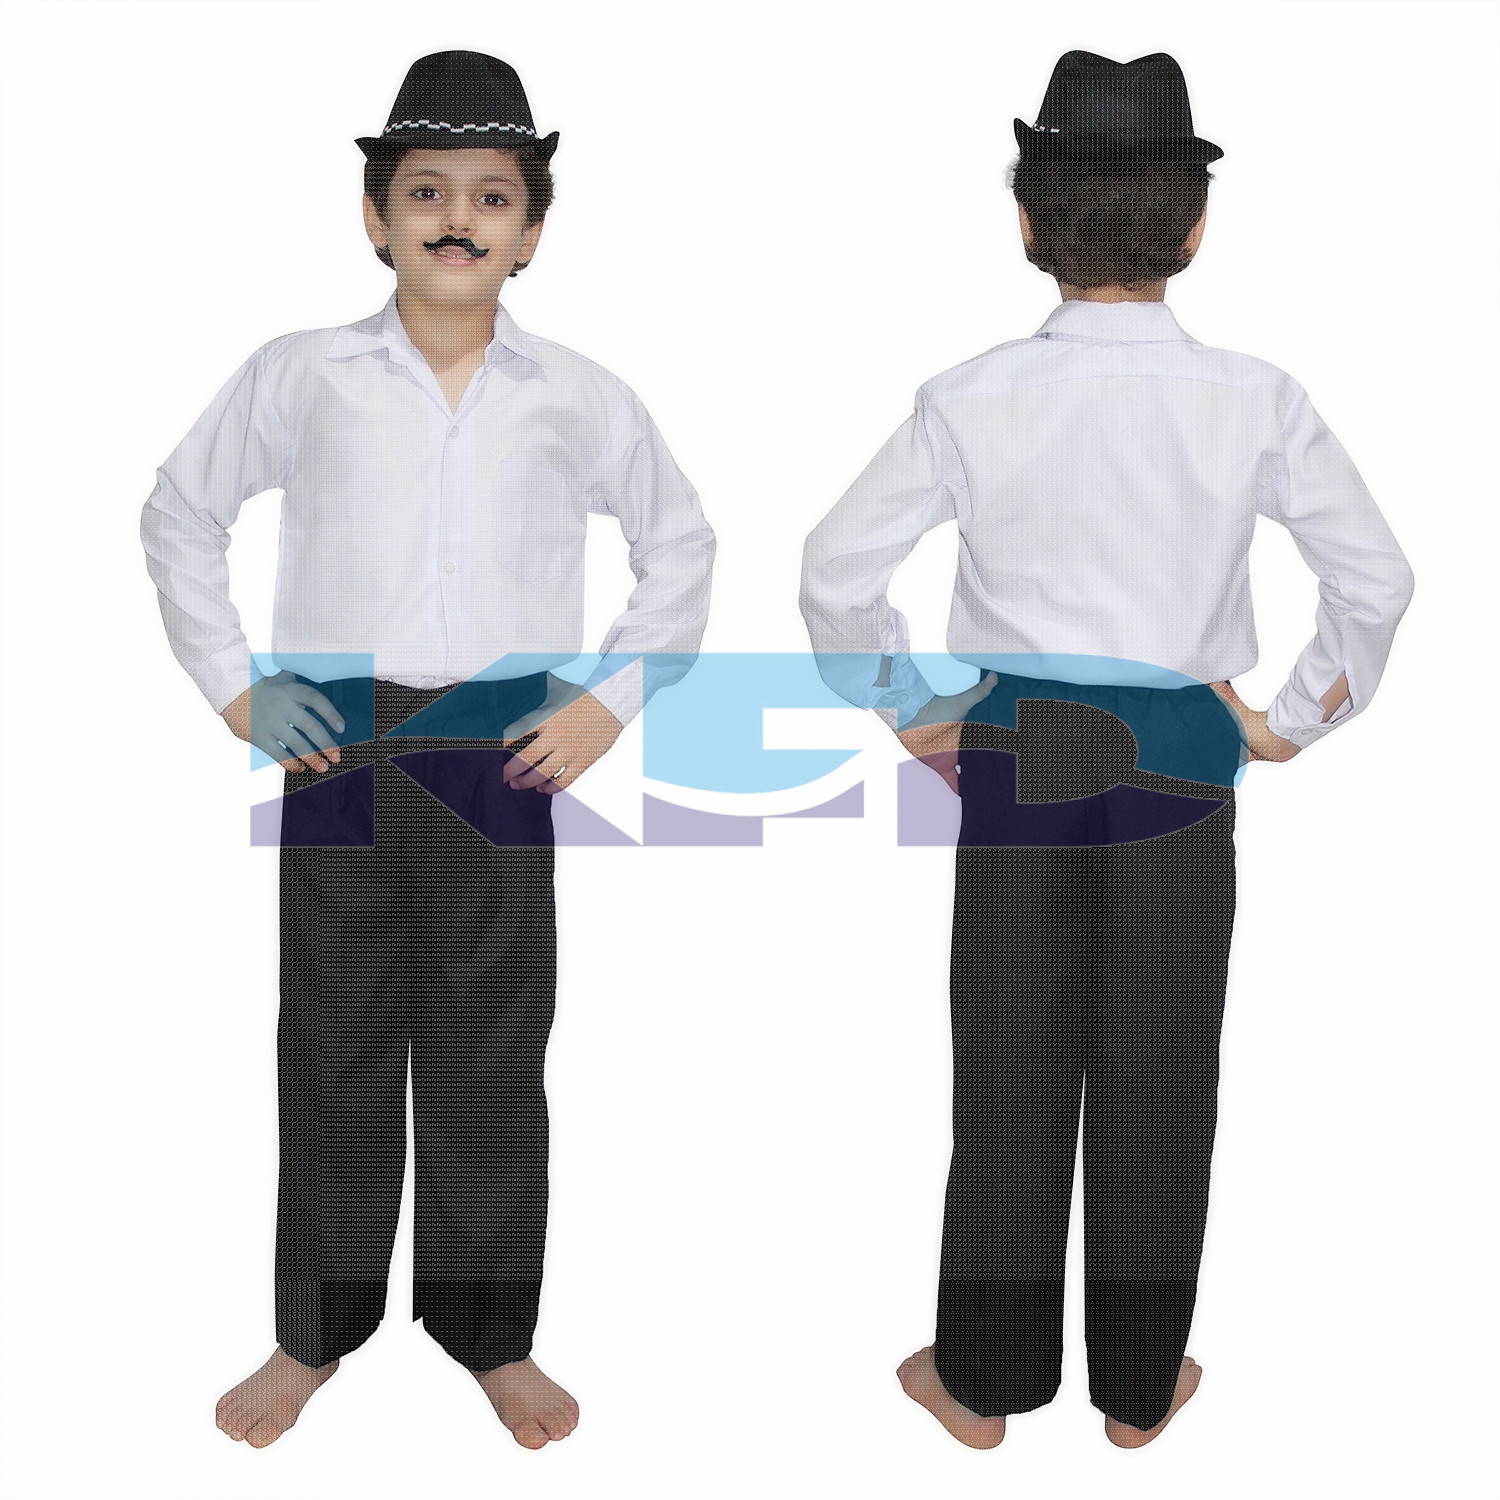 Bhagat Singh fancy dress for kids,National Hero/freedom figter Costume for Independence Day/Republic Day/Annual function/Theme party/Competition/Stage Shows Dress